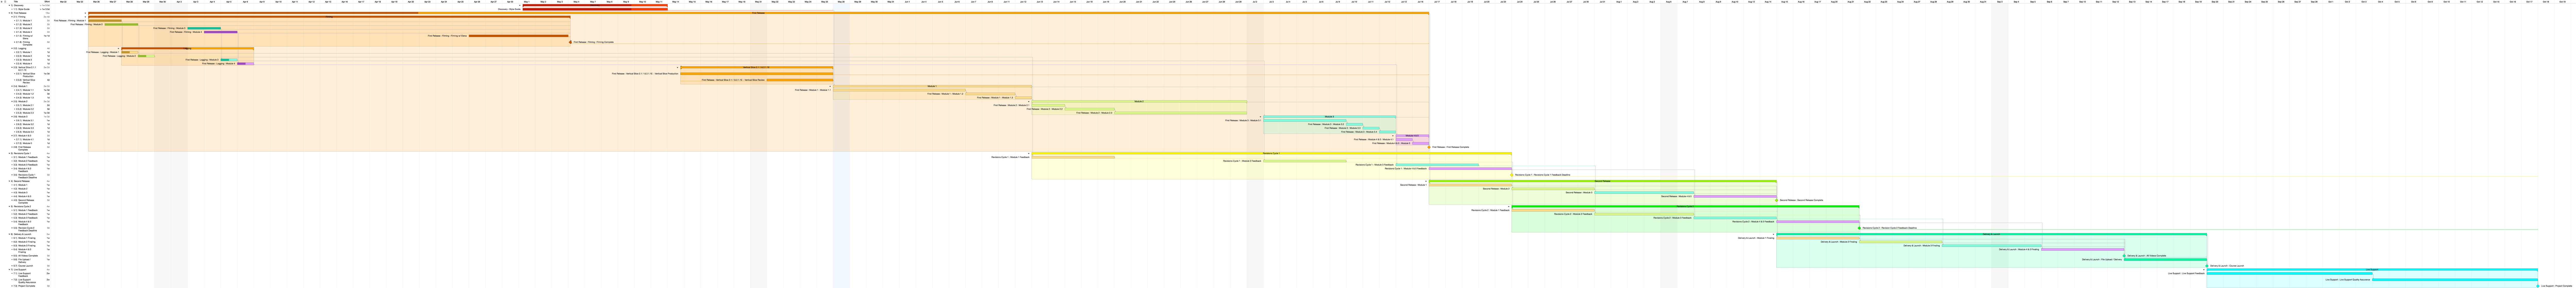 A sample of a Gantt chart for one of Onlea's projects